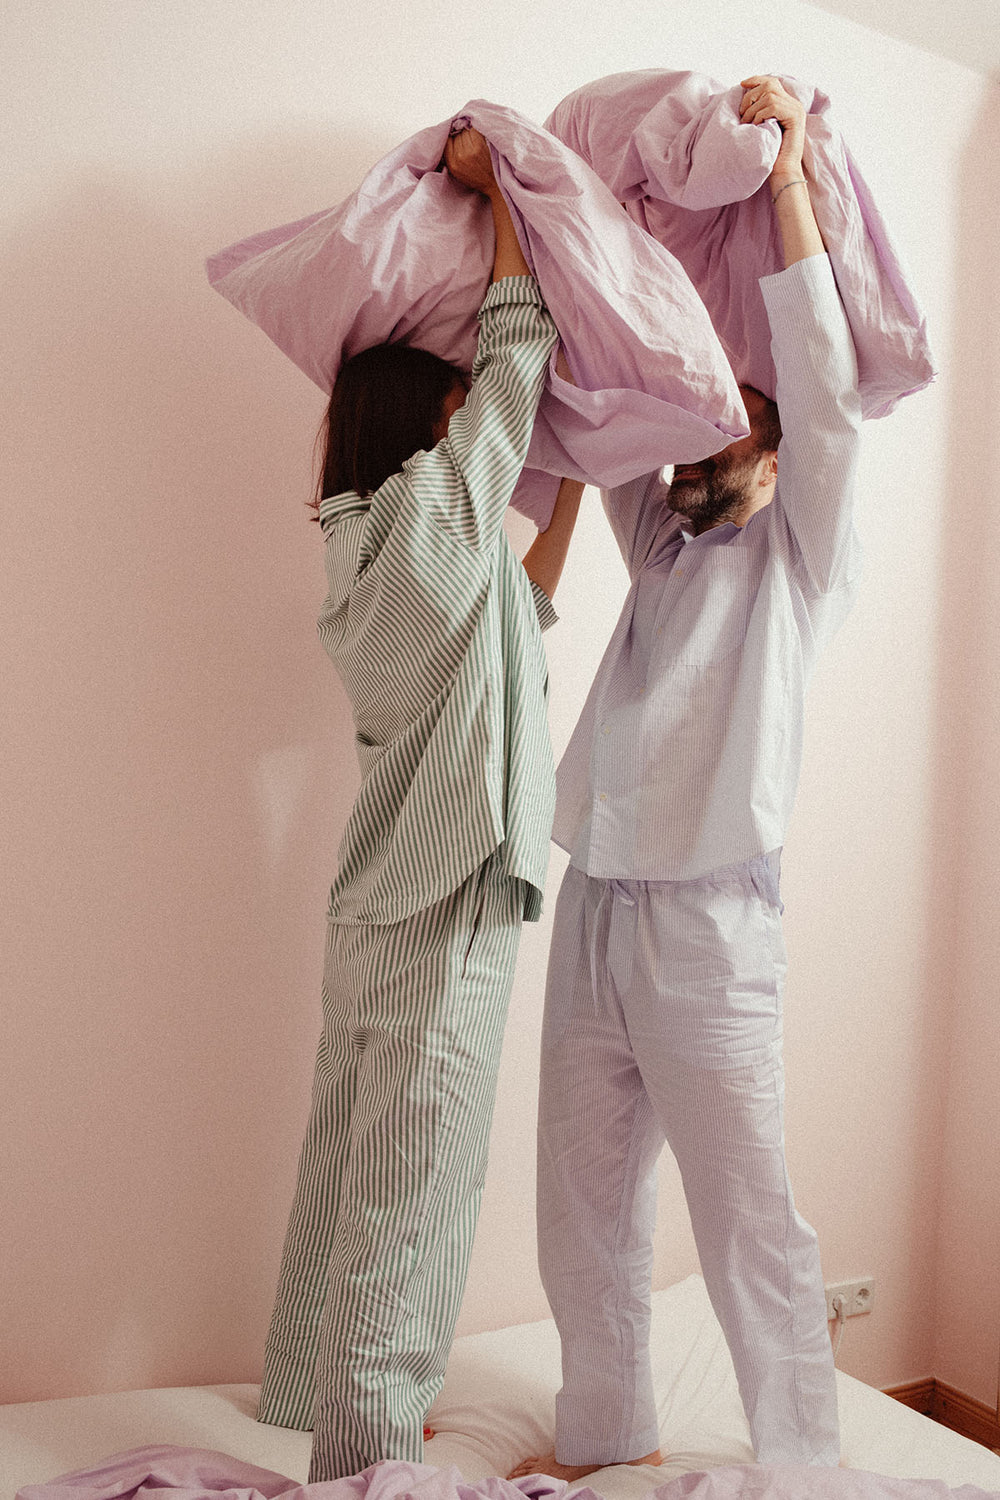 pillowfight in sustainable long pyjama sets in different stripes 